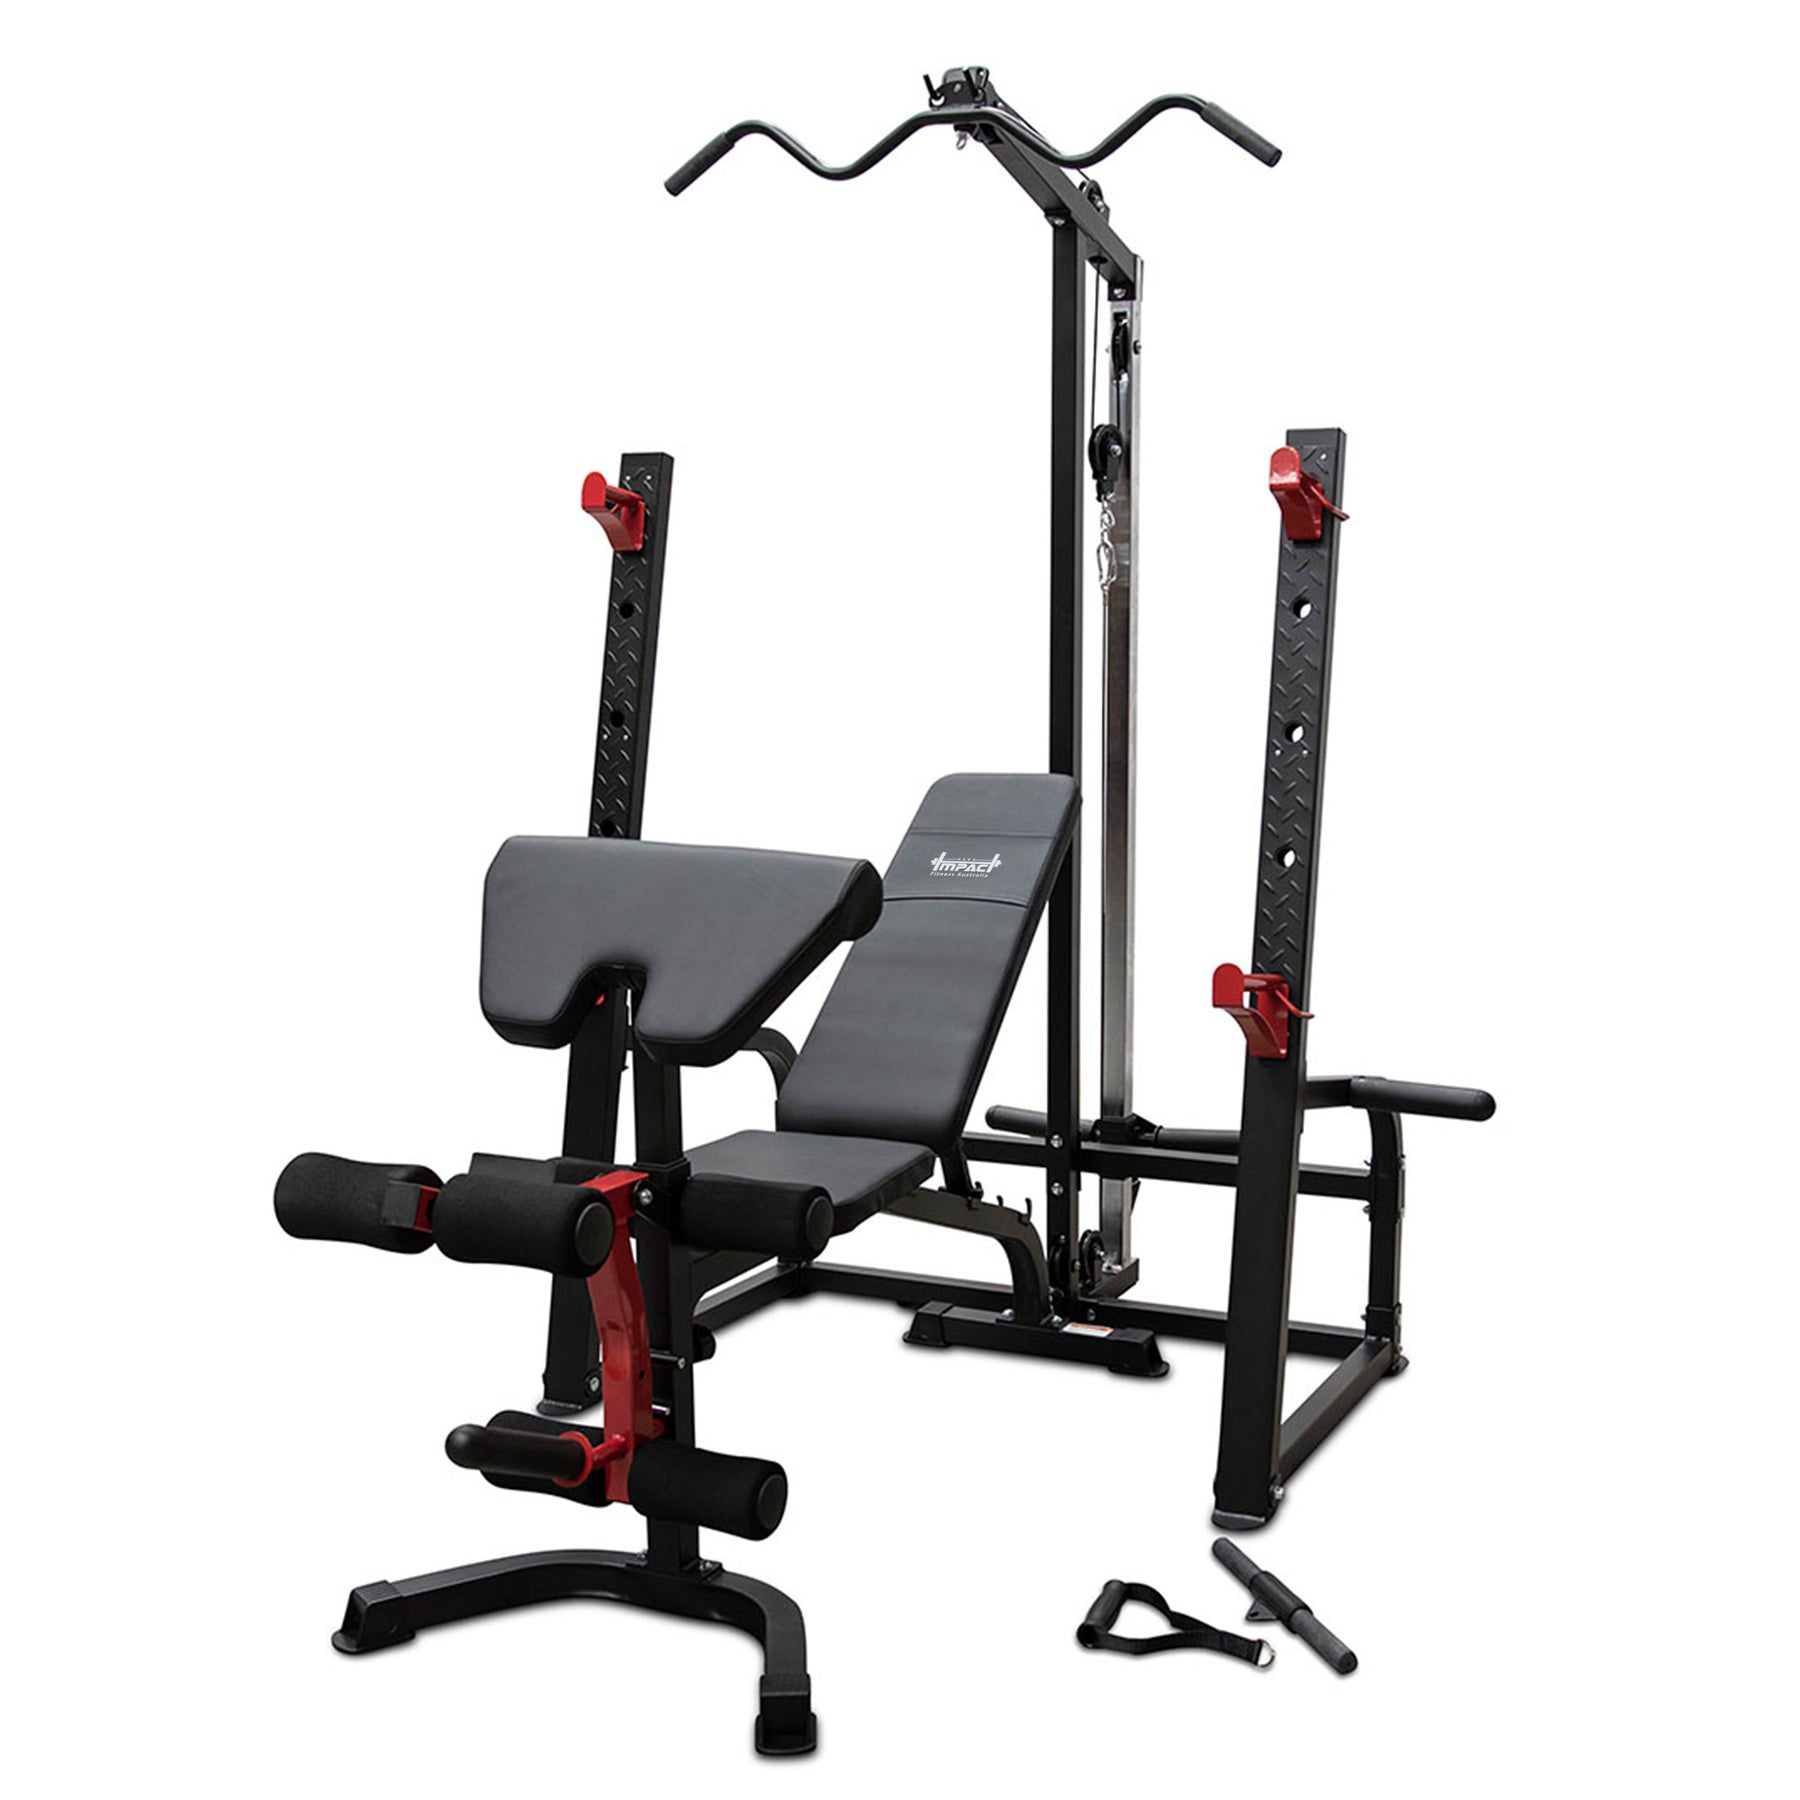 Impact Fitness Squat Rack Lat Pulldown + Adjustable Bench + 120kg Olympic Pro Bumper Weight Set